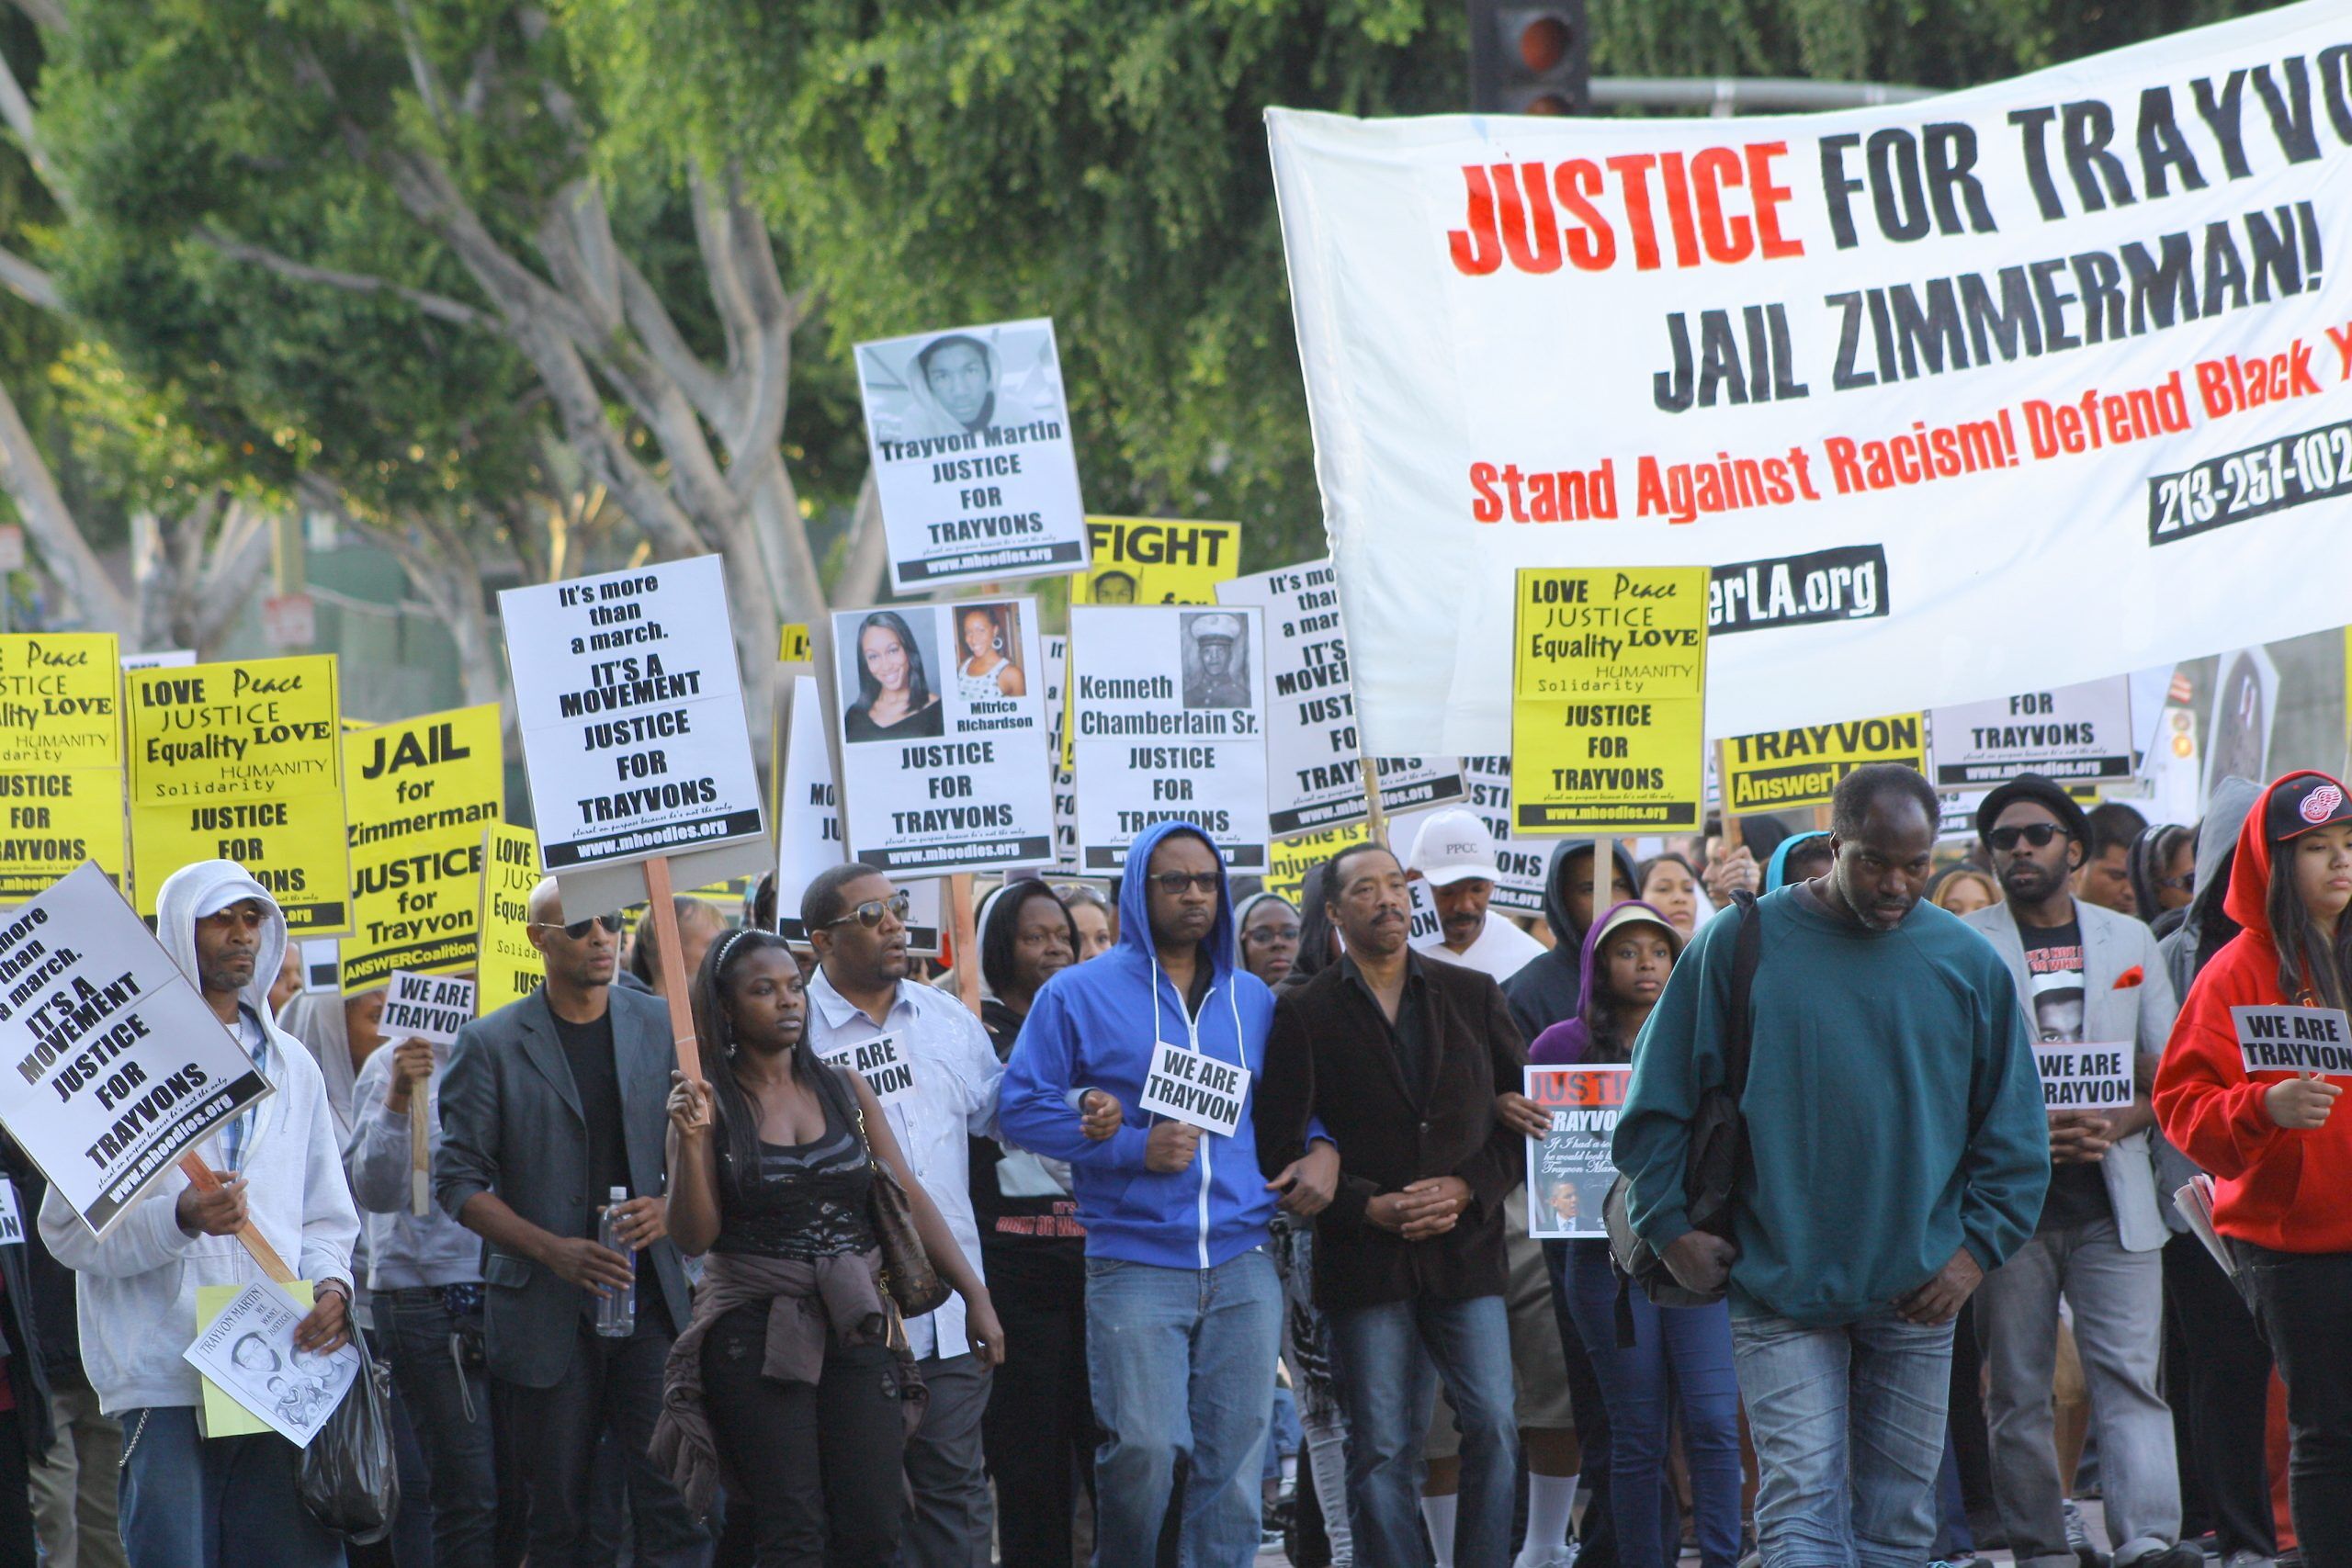 APRIL 9, 2012: Protesters march in support of Trayvon Martin and other victims of violence in Los Angeles